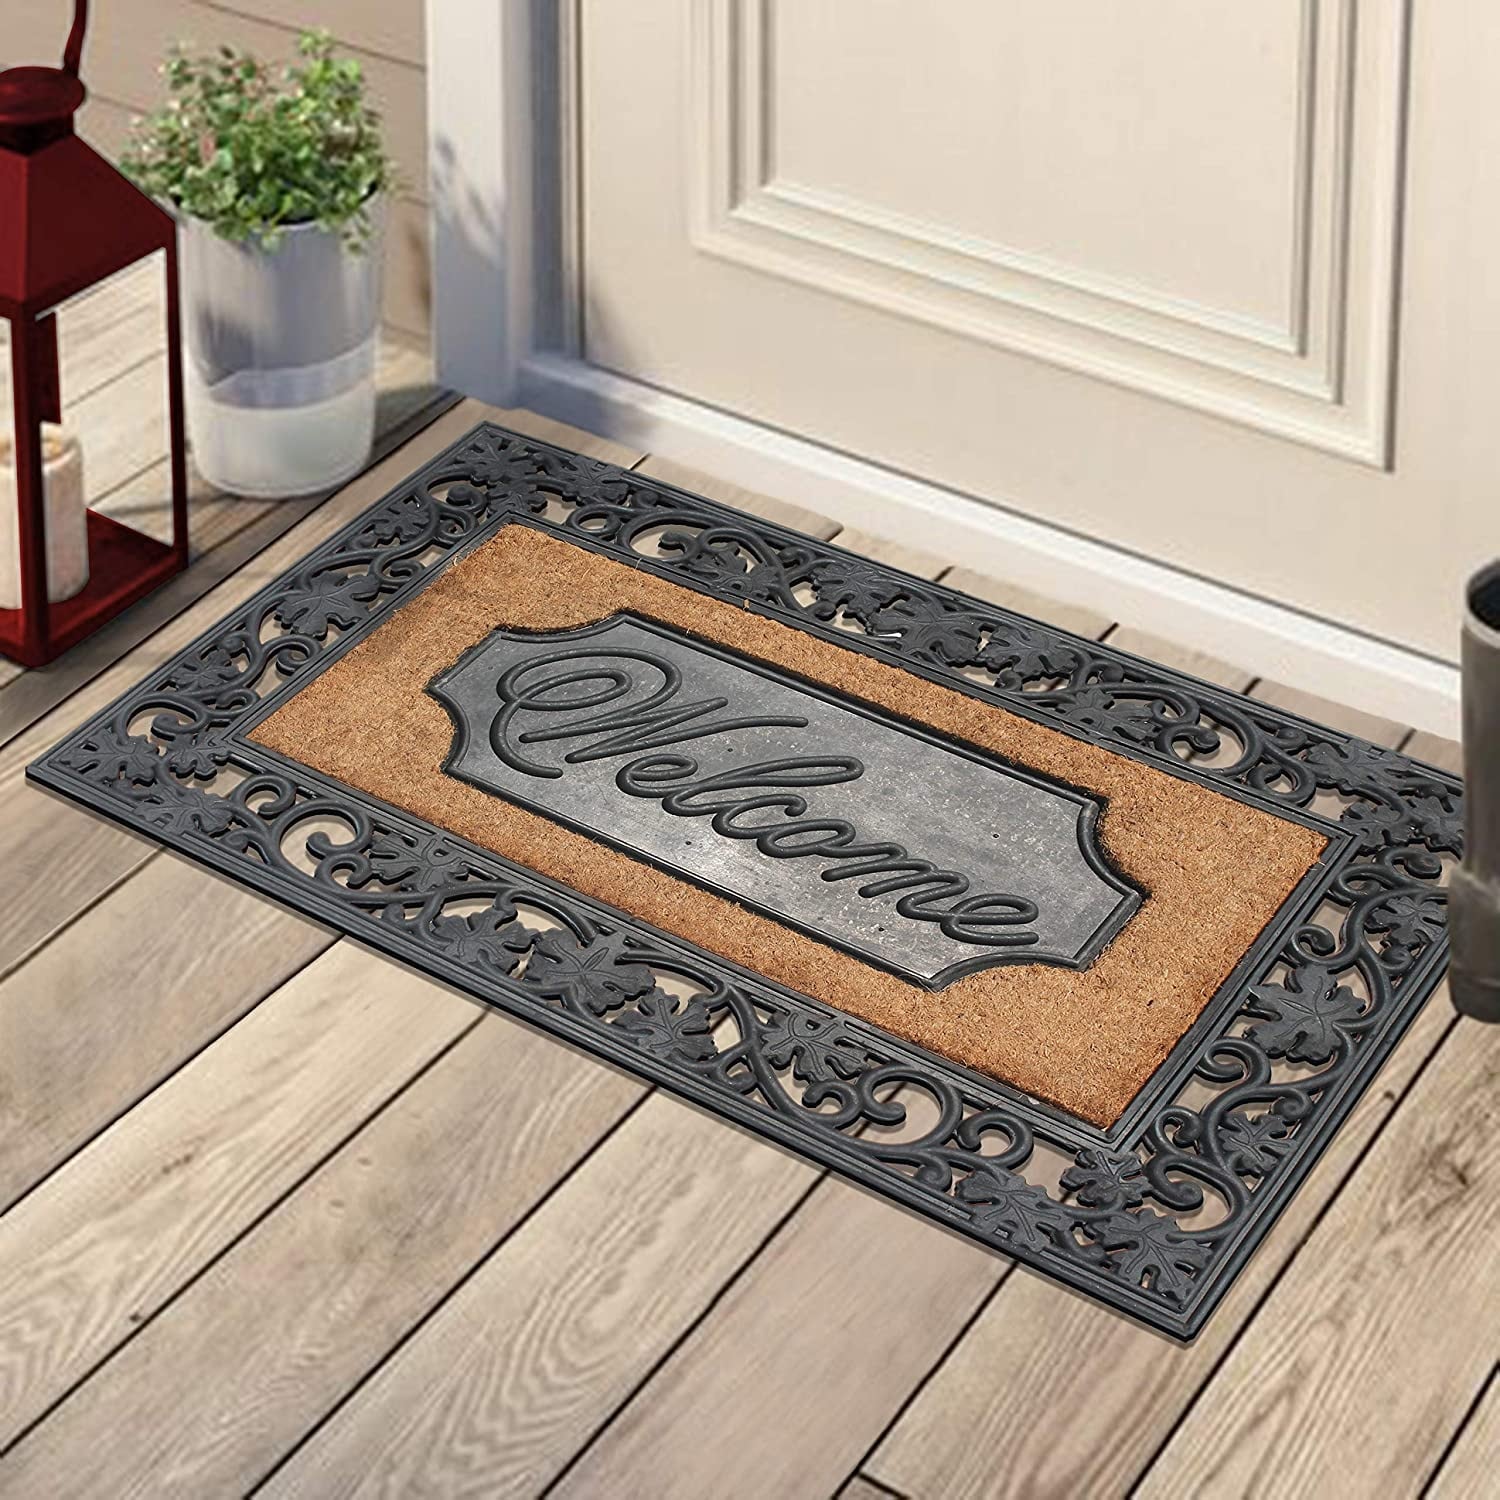 A1hc Rubber & Coir Monogrammed Doormat for Front Door, 24x39, Anti-Shed Treated Durable Doormat for Outdoor Entrance, Heavy Duty - N